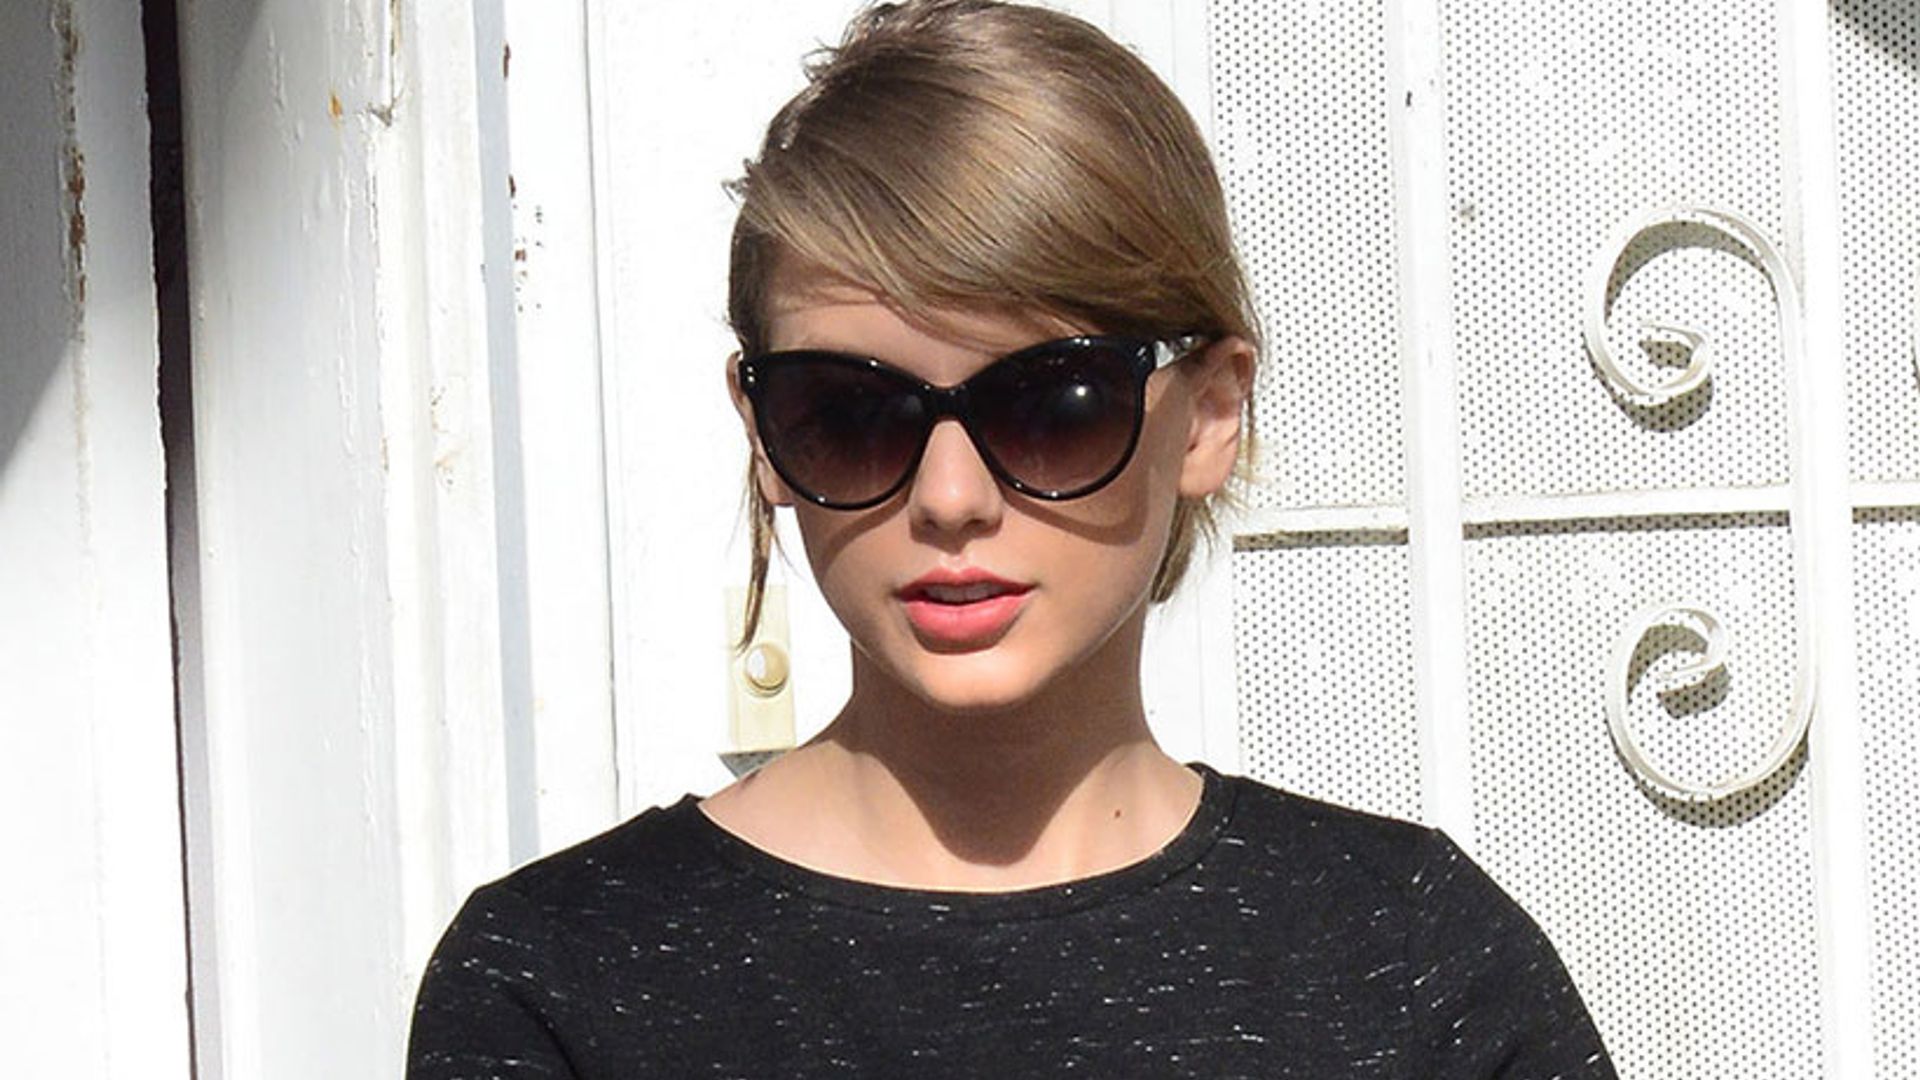 Taylor Swift announces new single and album - find out the release date!